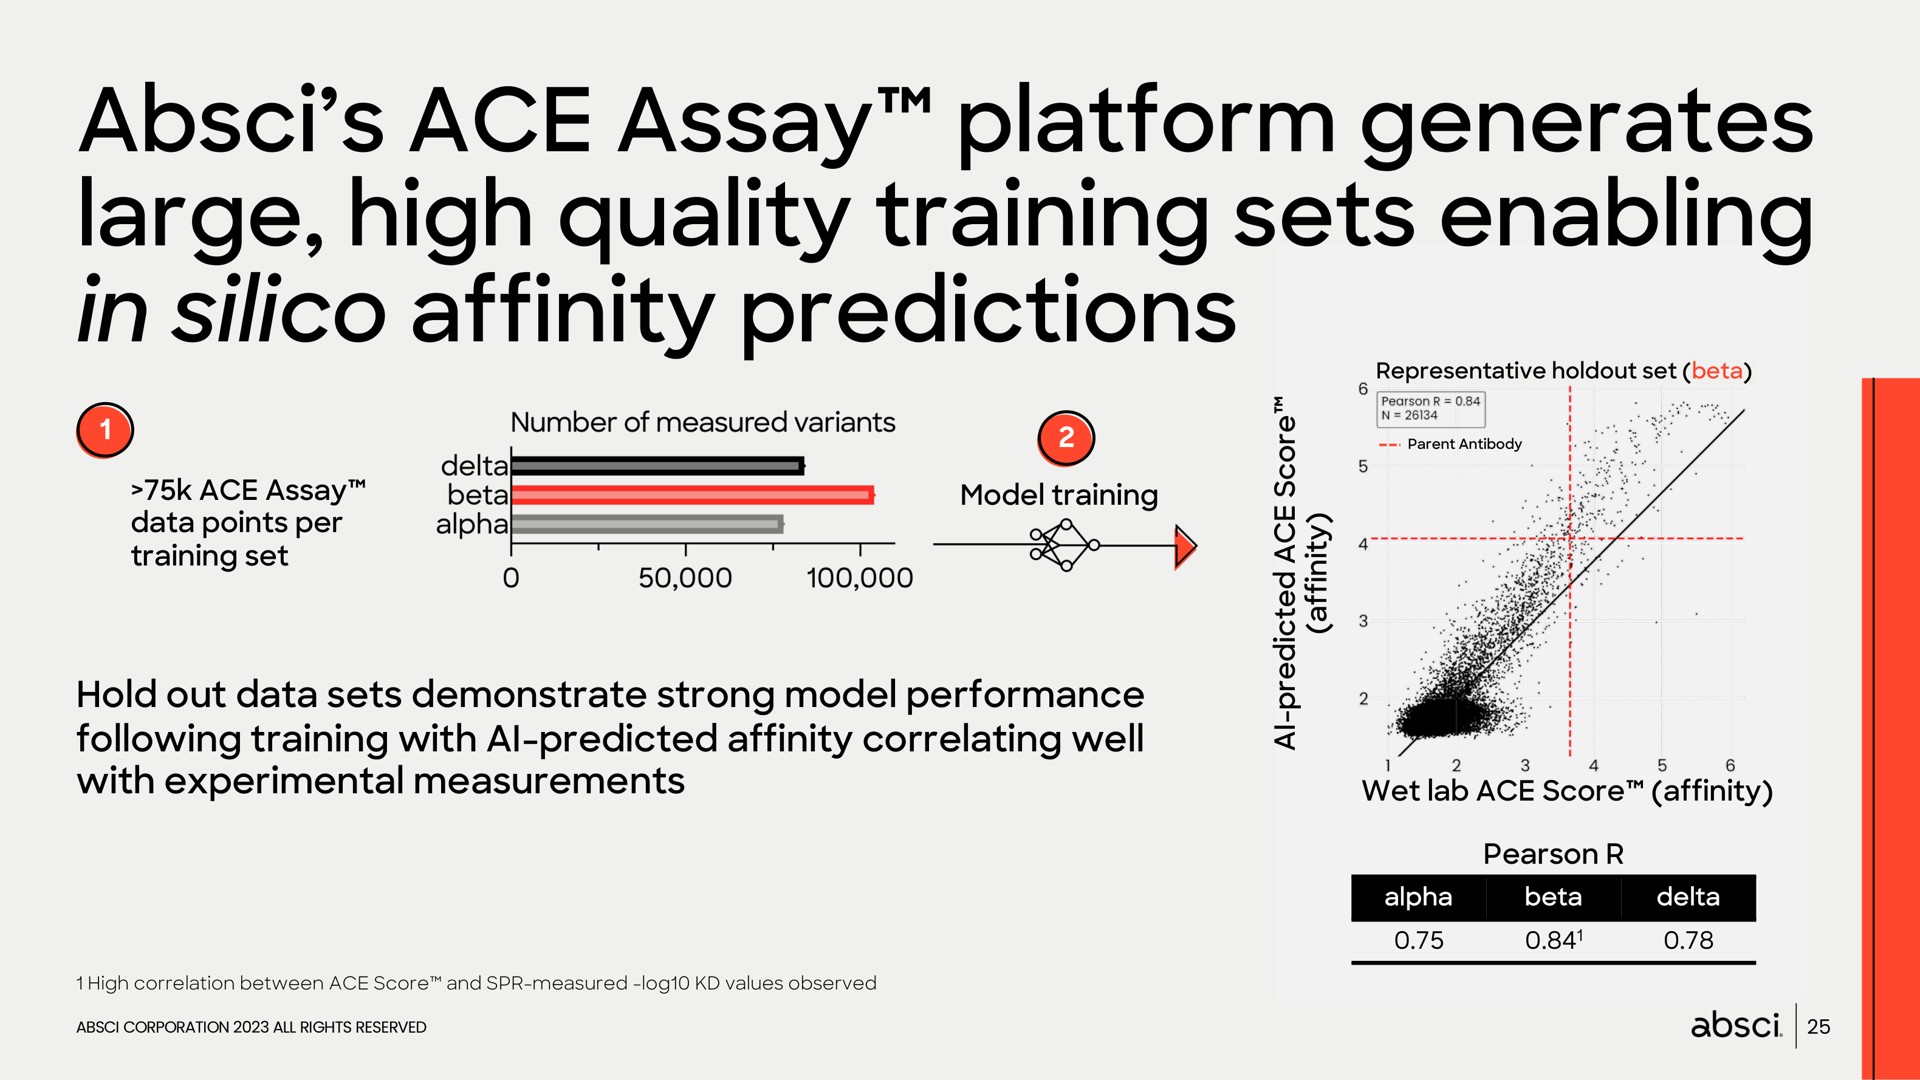 ace assay platform generates large high quality training sets enabling in silico affinity predictions | Absci